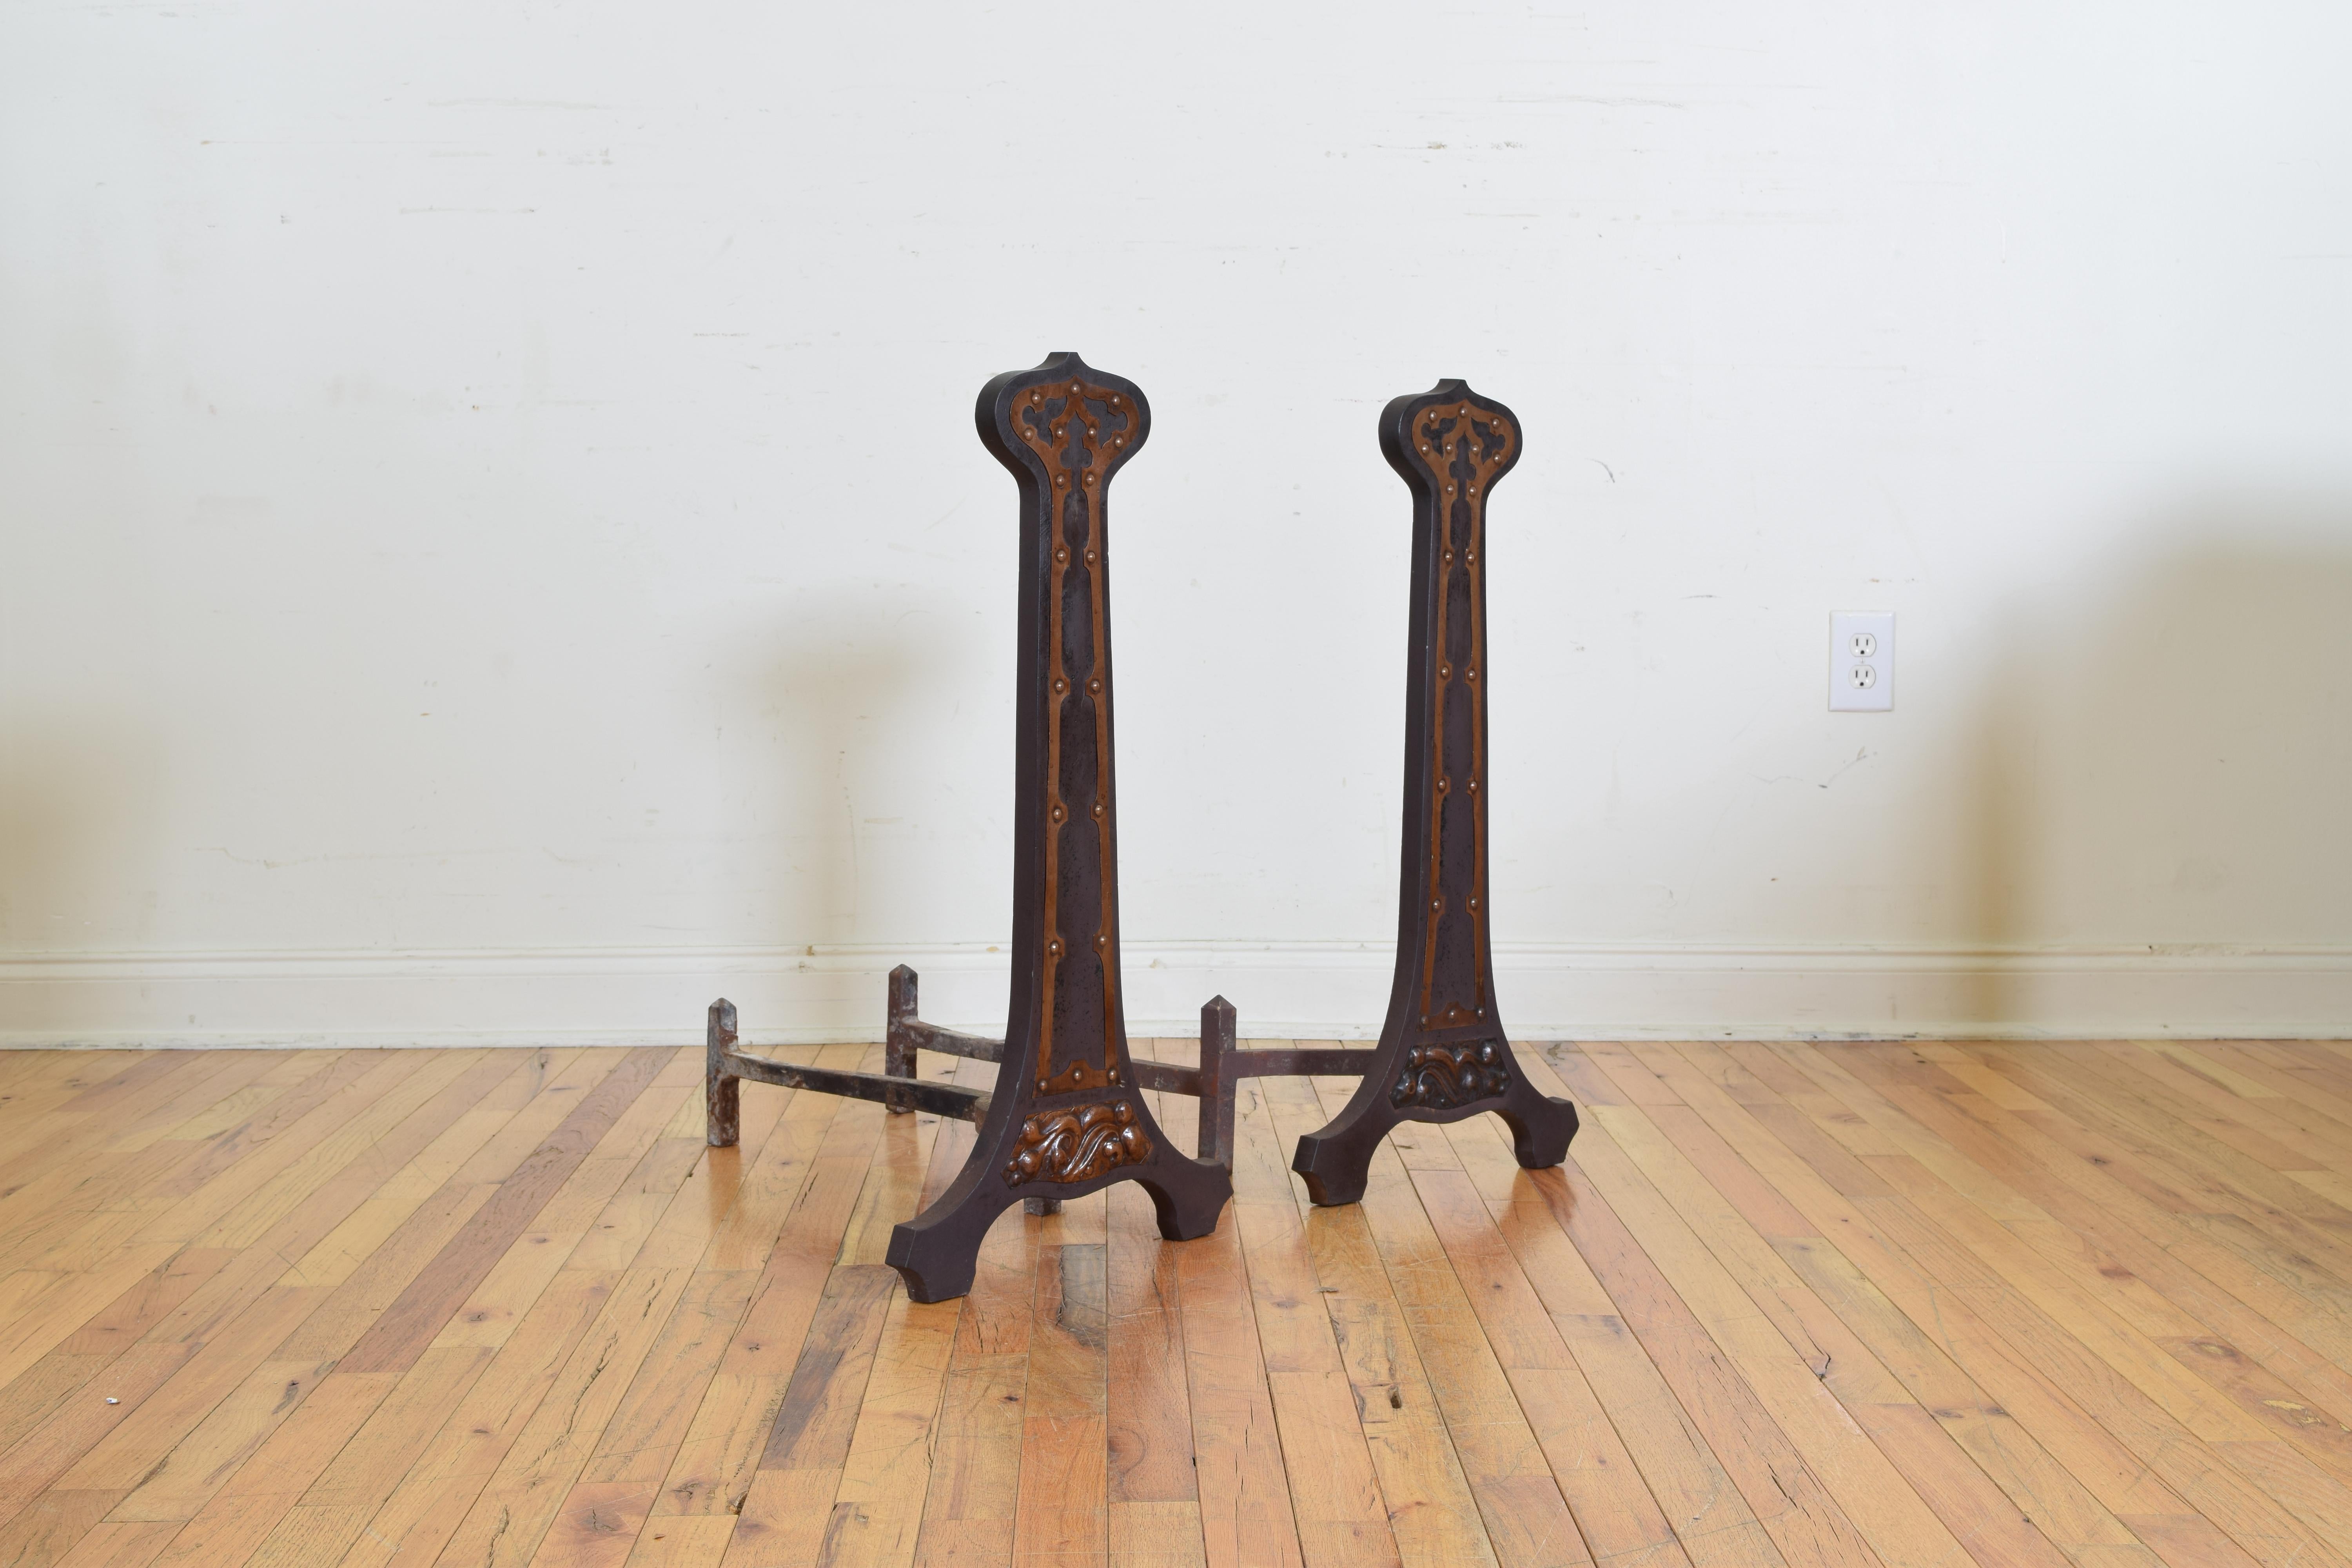 North American Pair of American Arts and Crafts Cast Iron and Copper Andirons, circa 1890-1900